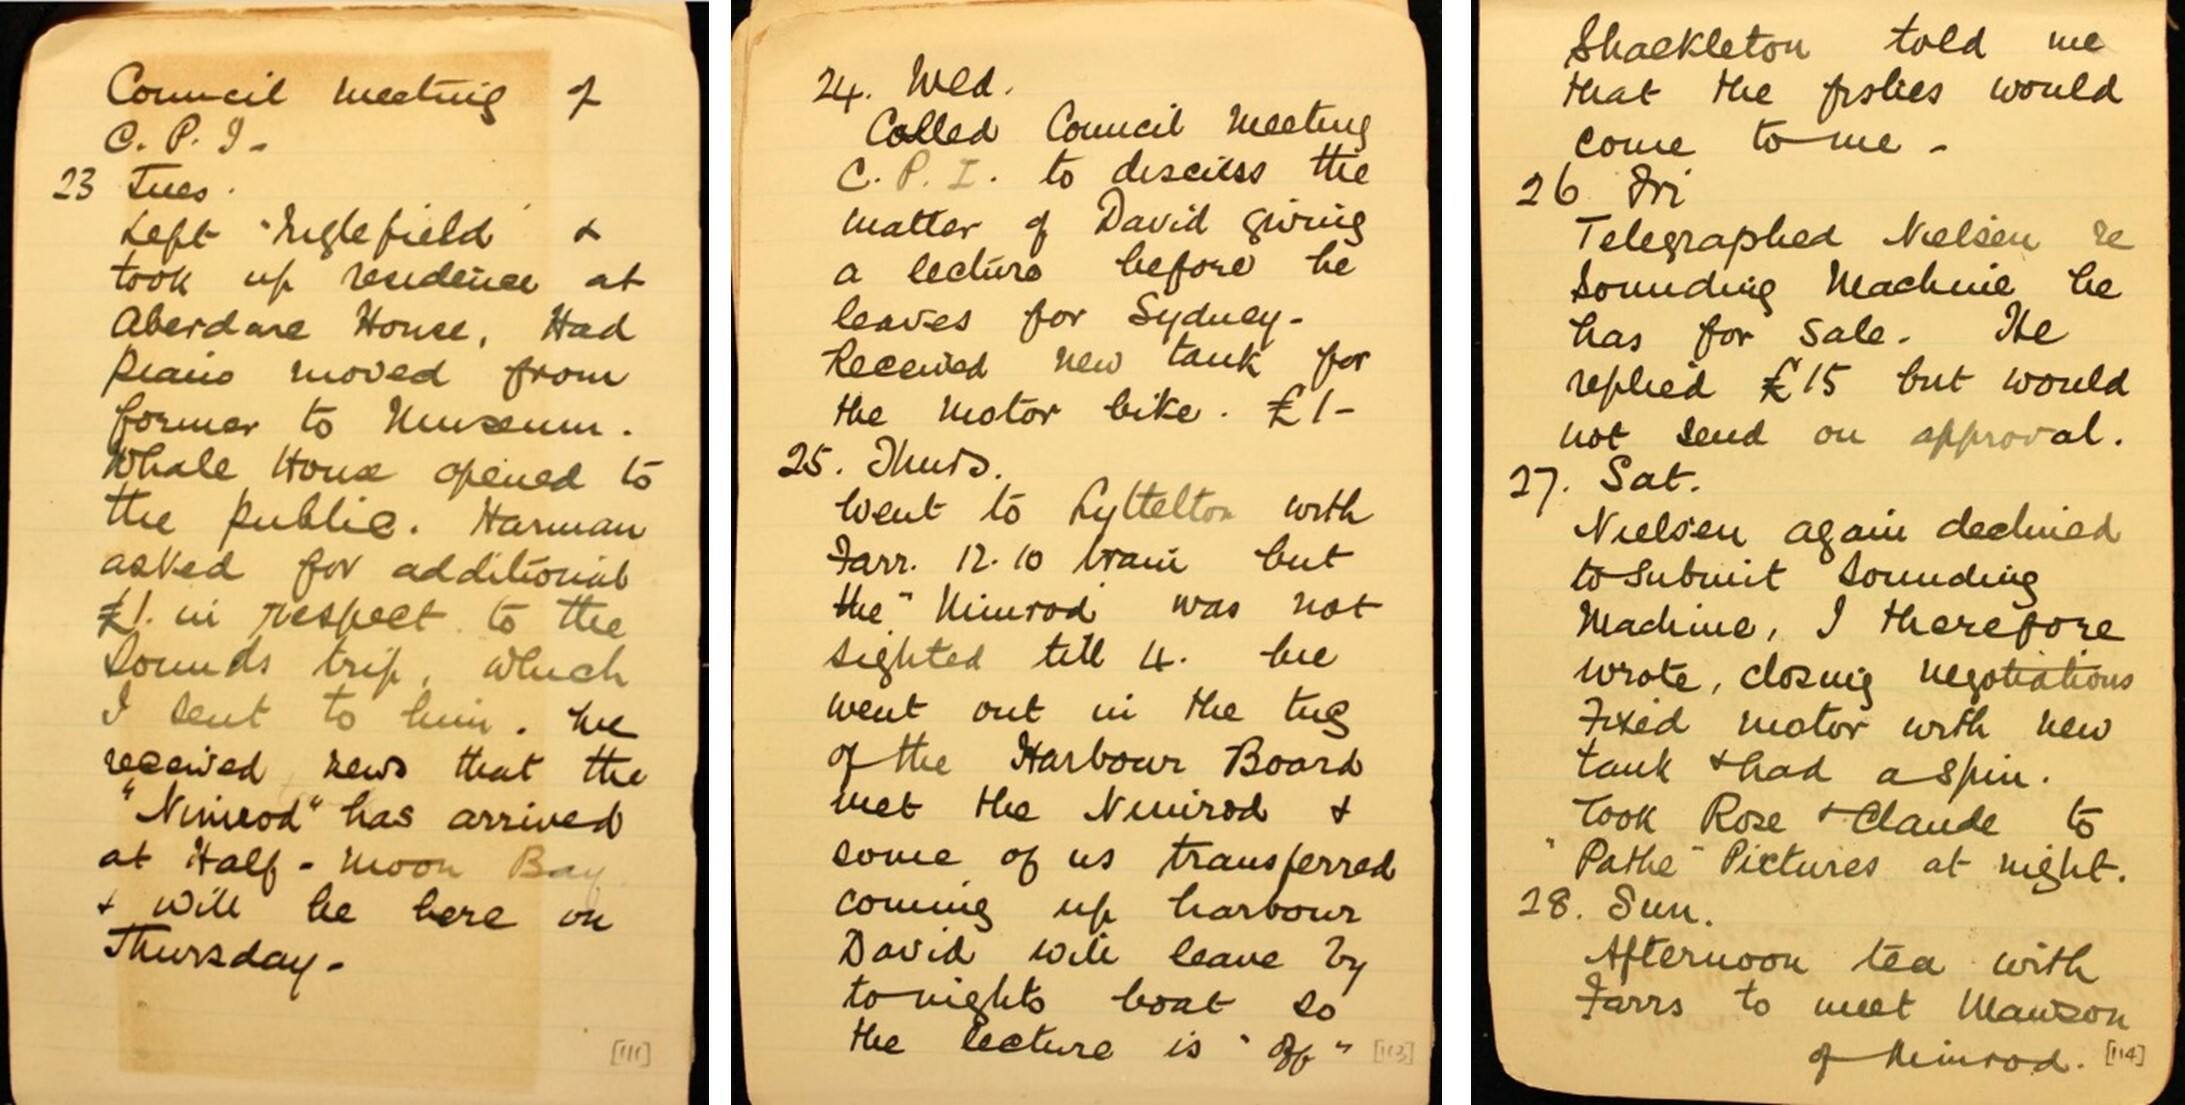 Edgar Waite’s diary entries from March 1909 recording the return of Shackleton’s expedition to Christchurch and a guarantee from Shackleton that the fish collected in Antarctica would be given to Canterbury Museum. Images courtesy of the Australian Museum